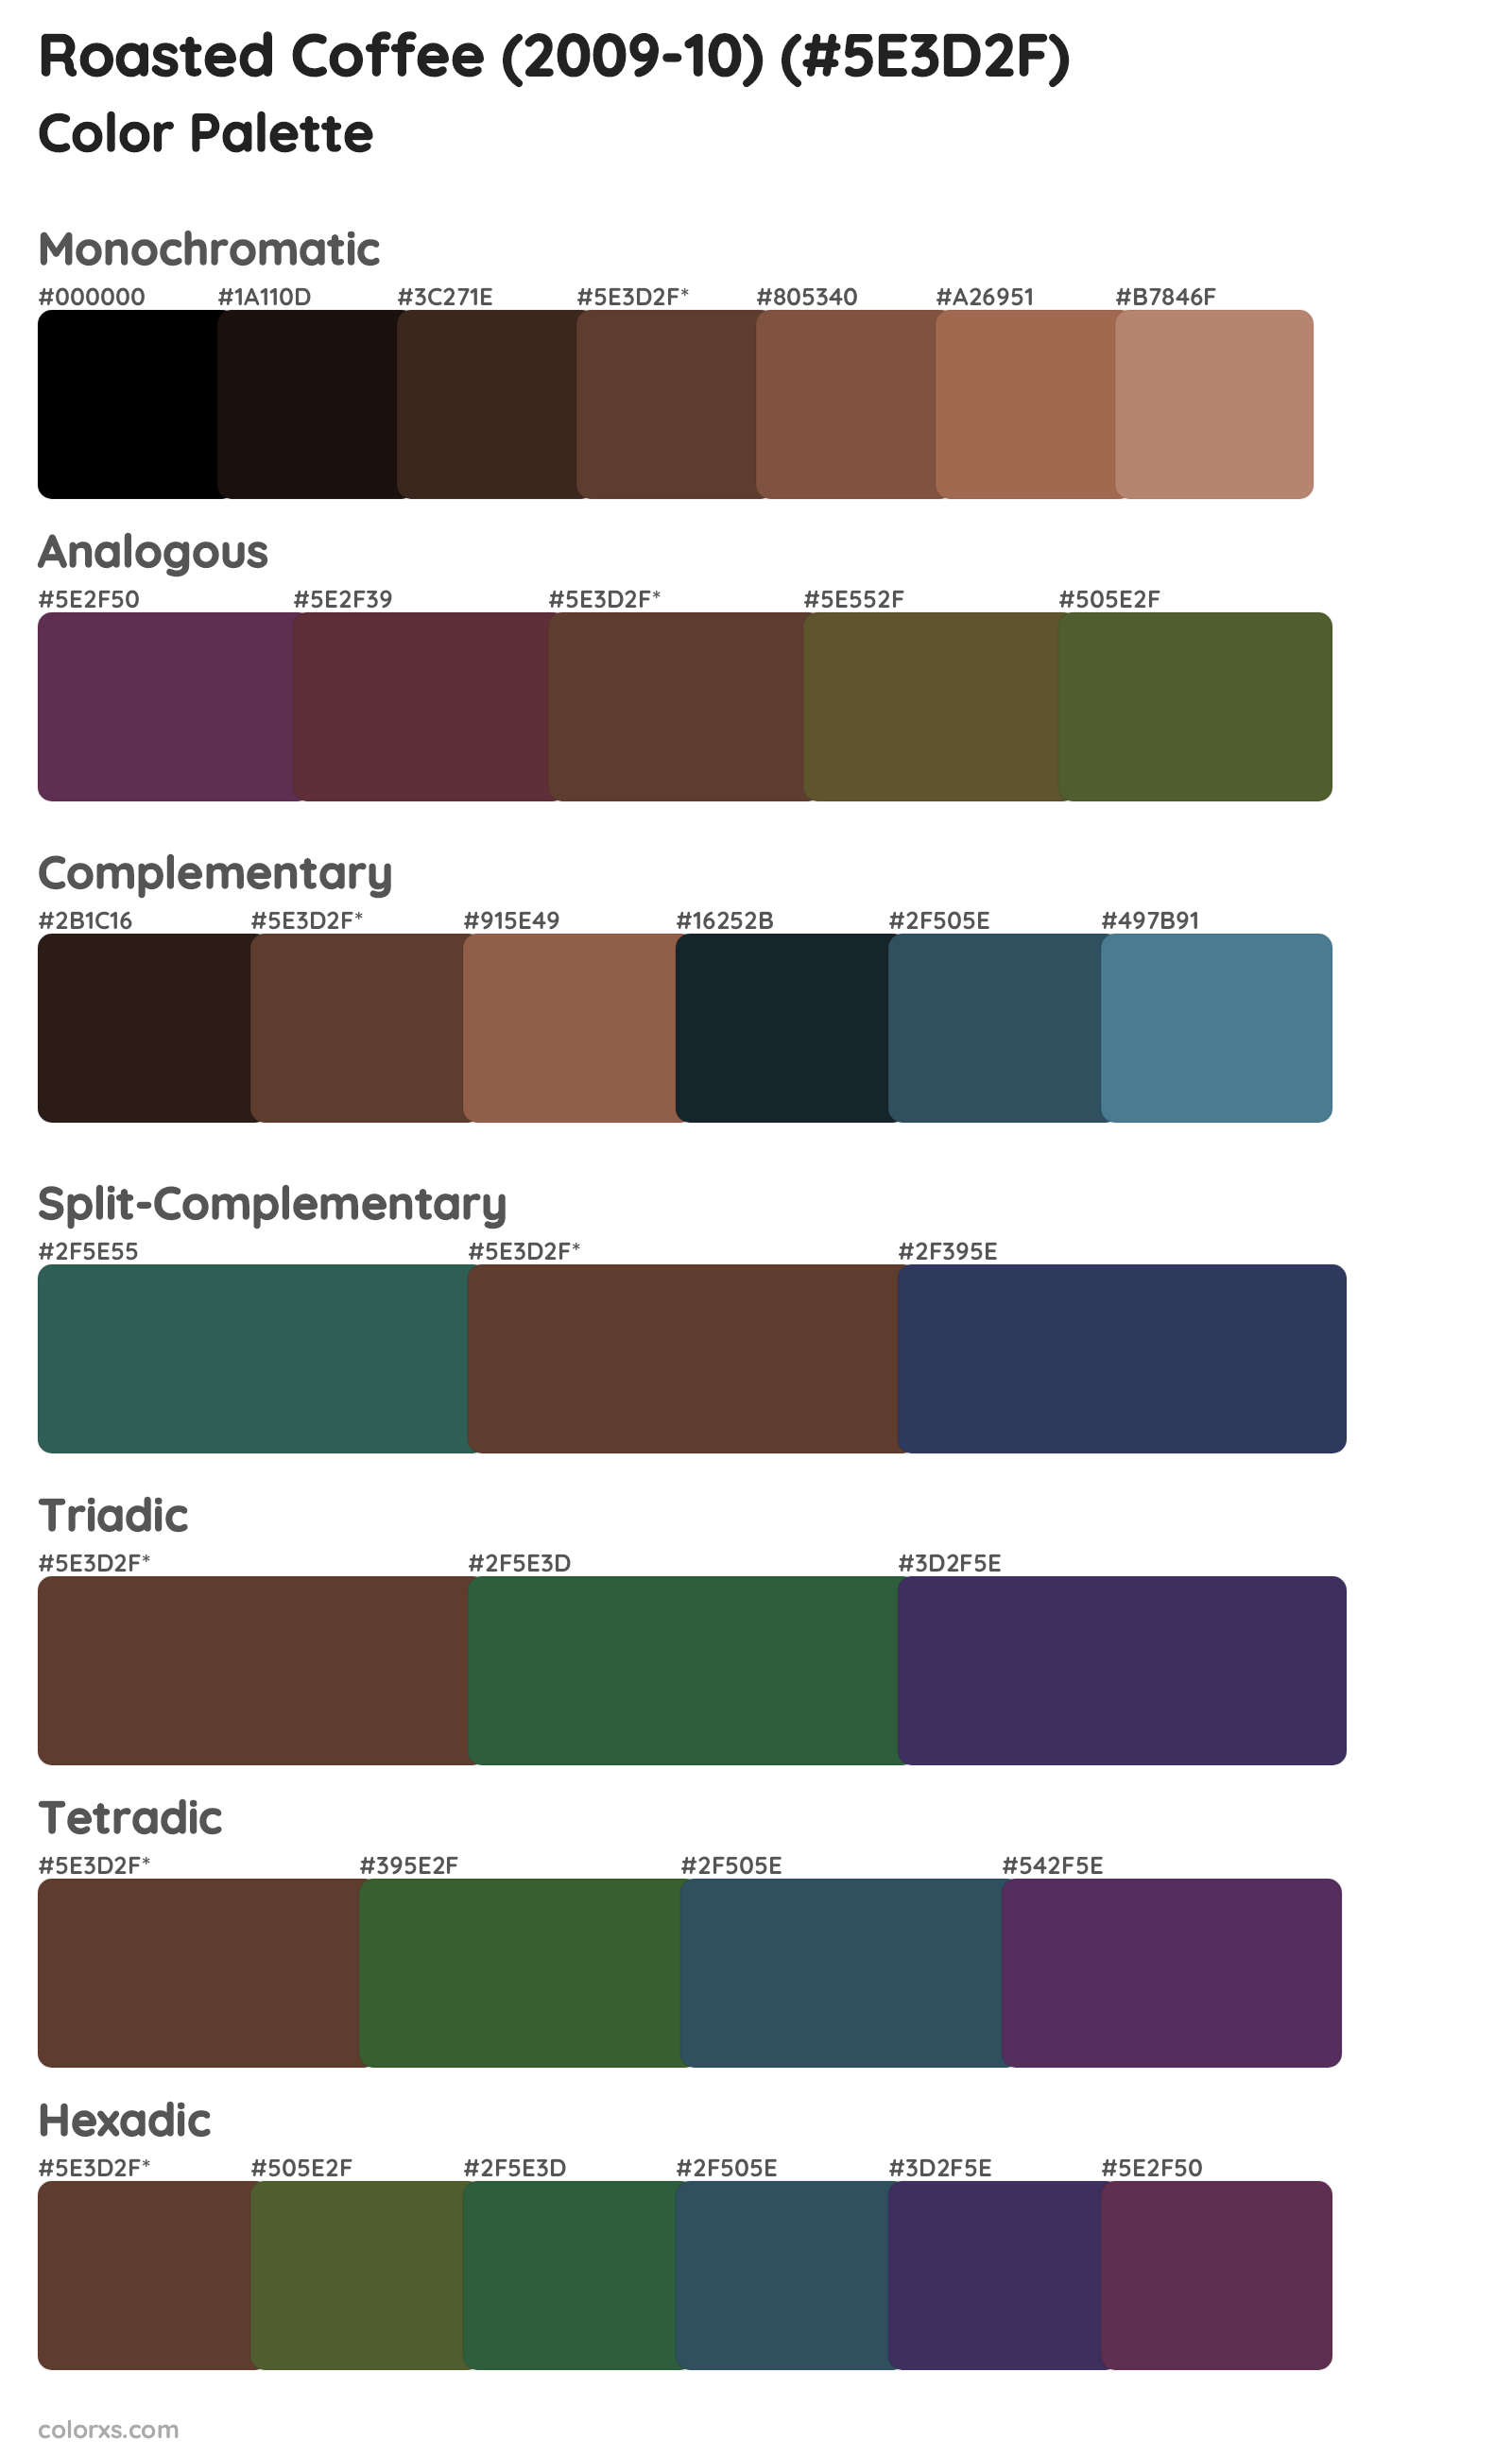 Roasted Coffee (2009-10) Color Scheme Palettes